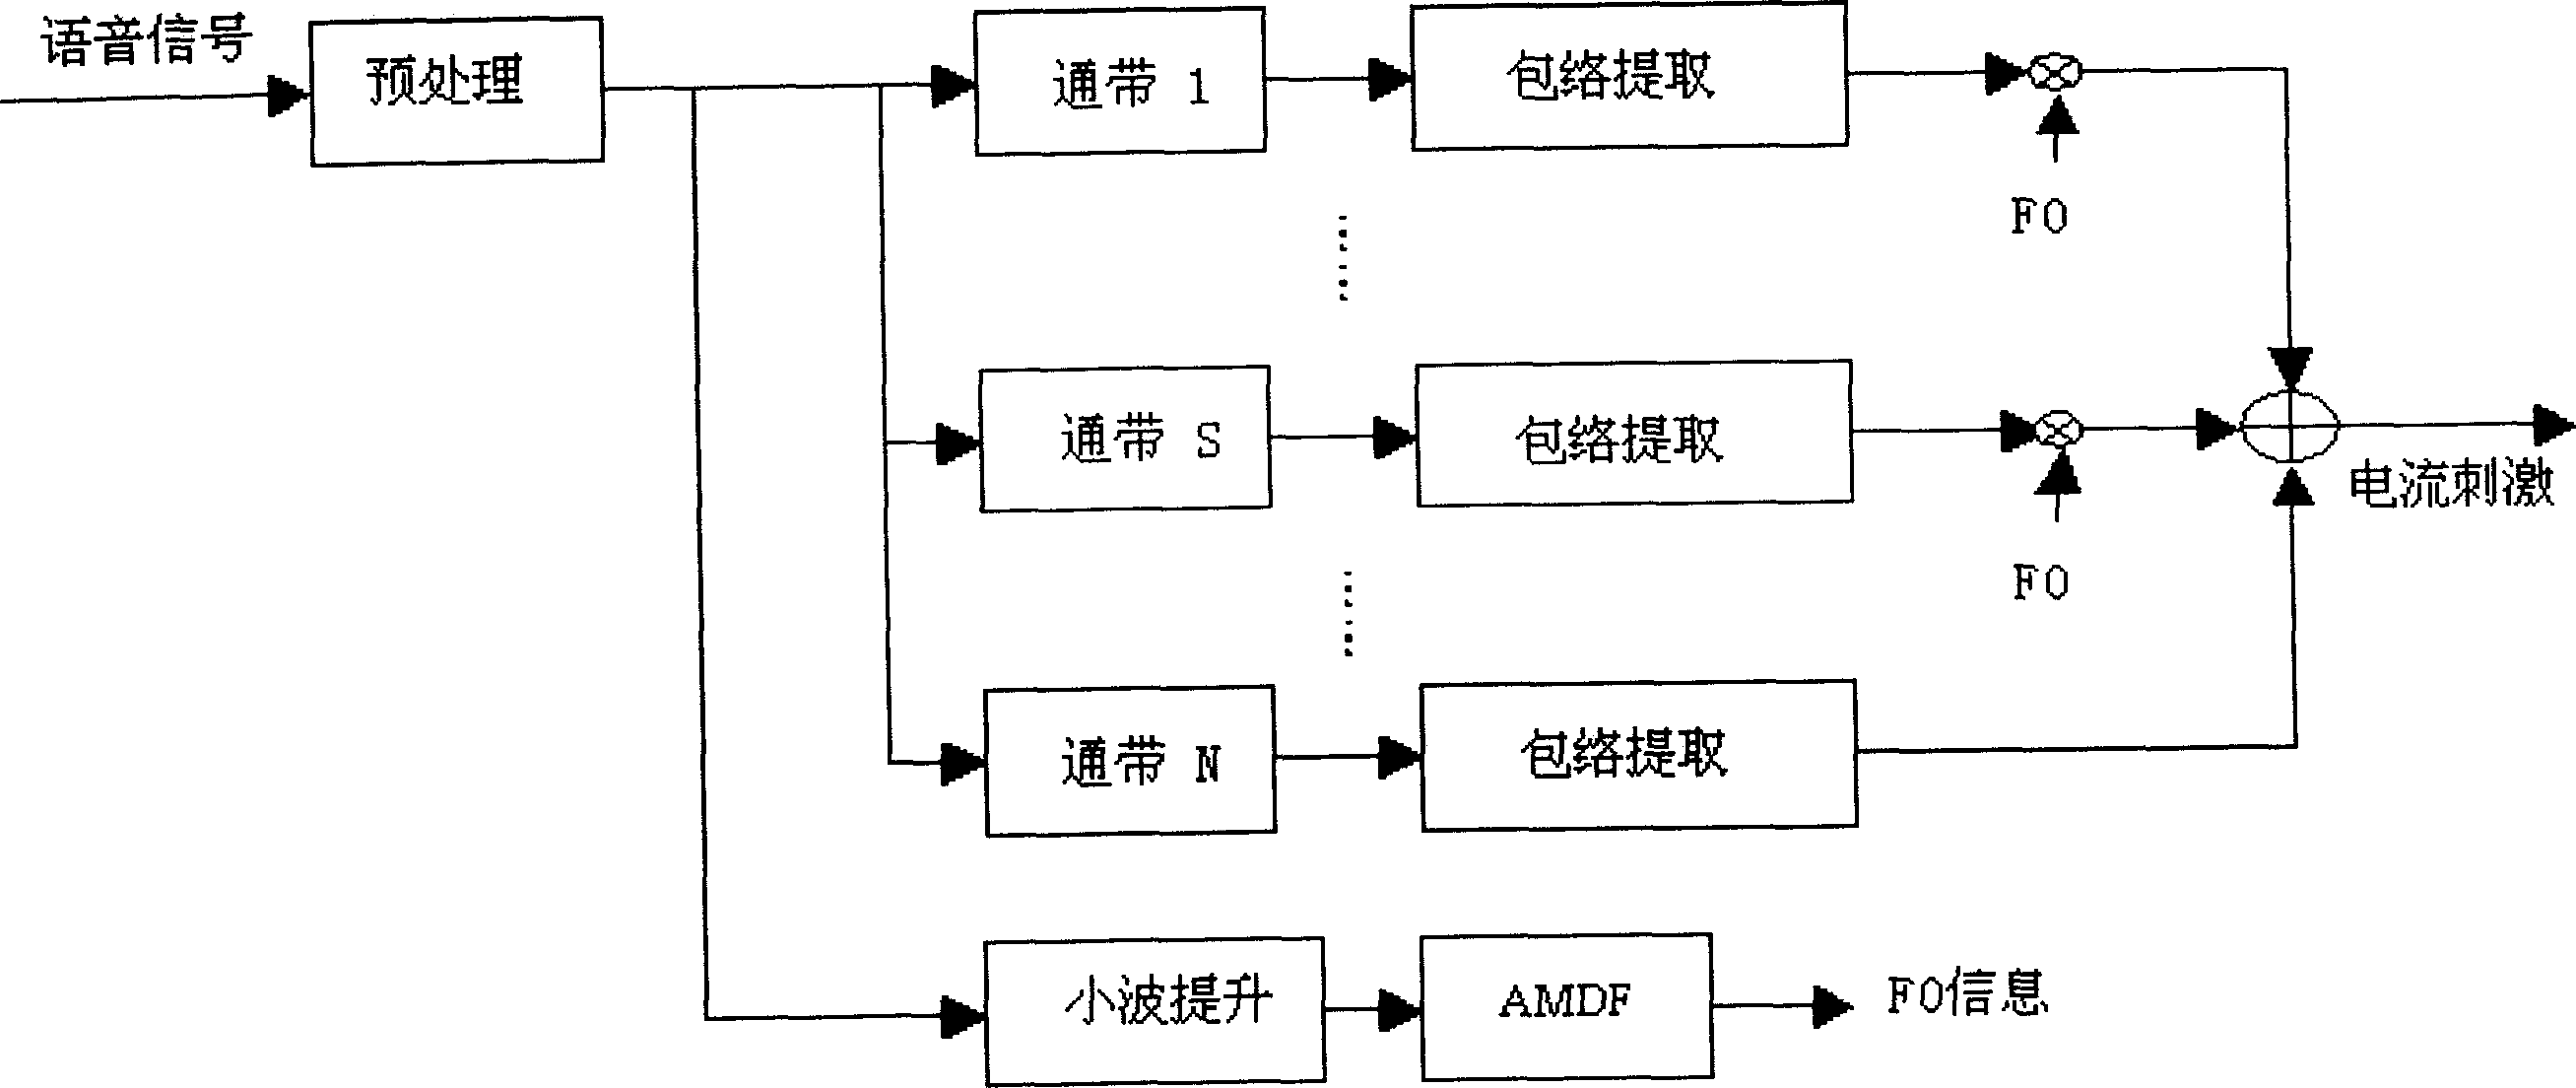 Electronic cochlea language processing method having S parameter control and based-on Chinese language characteristics